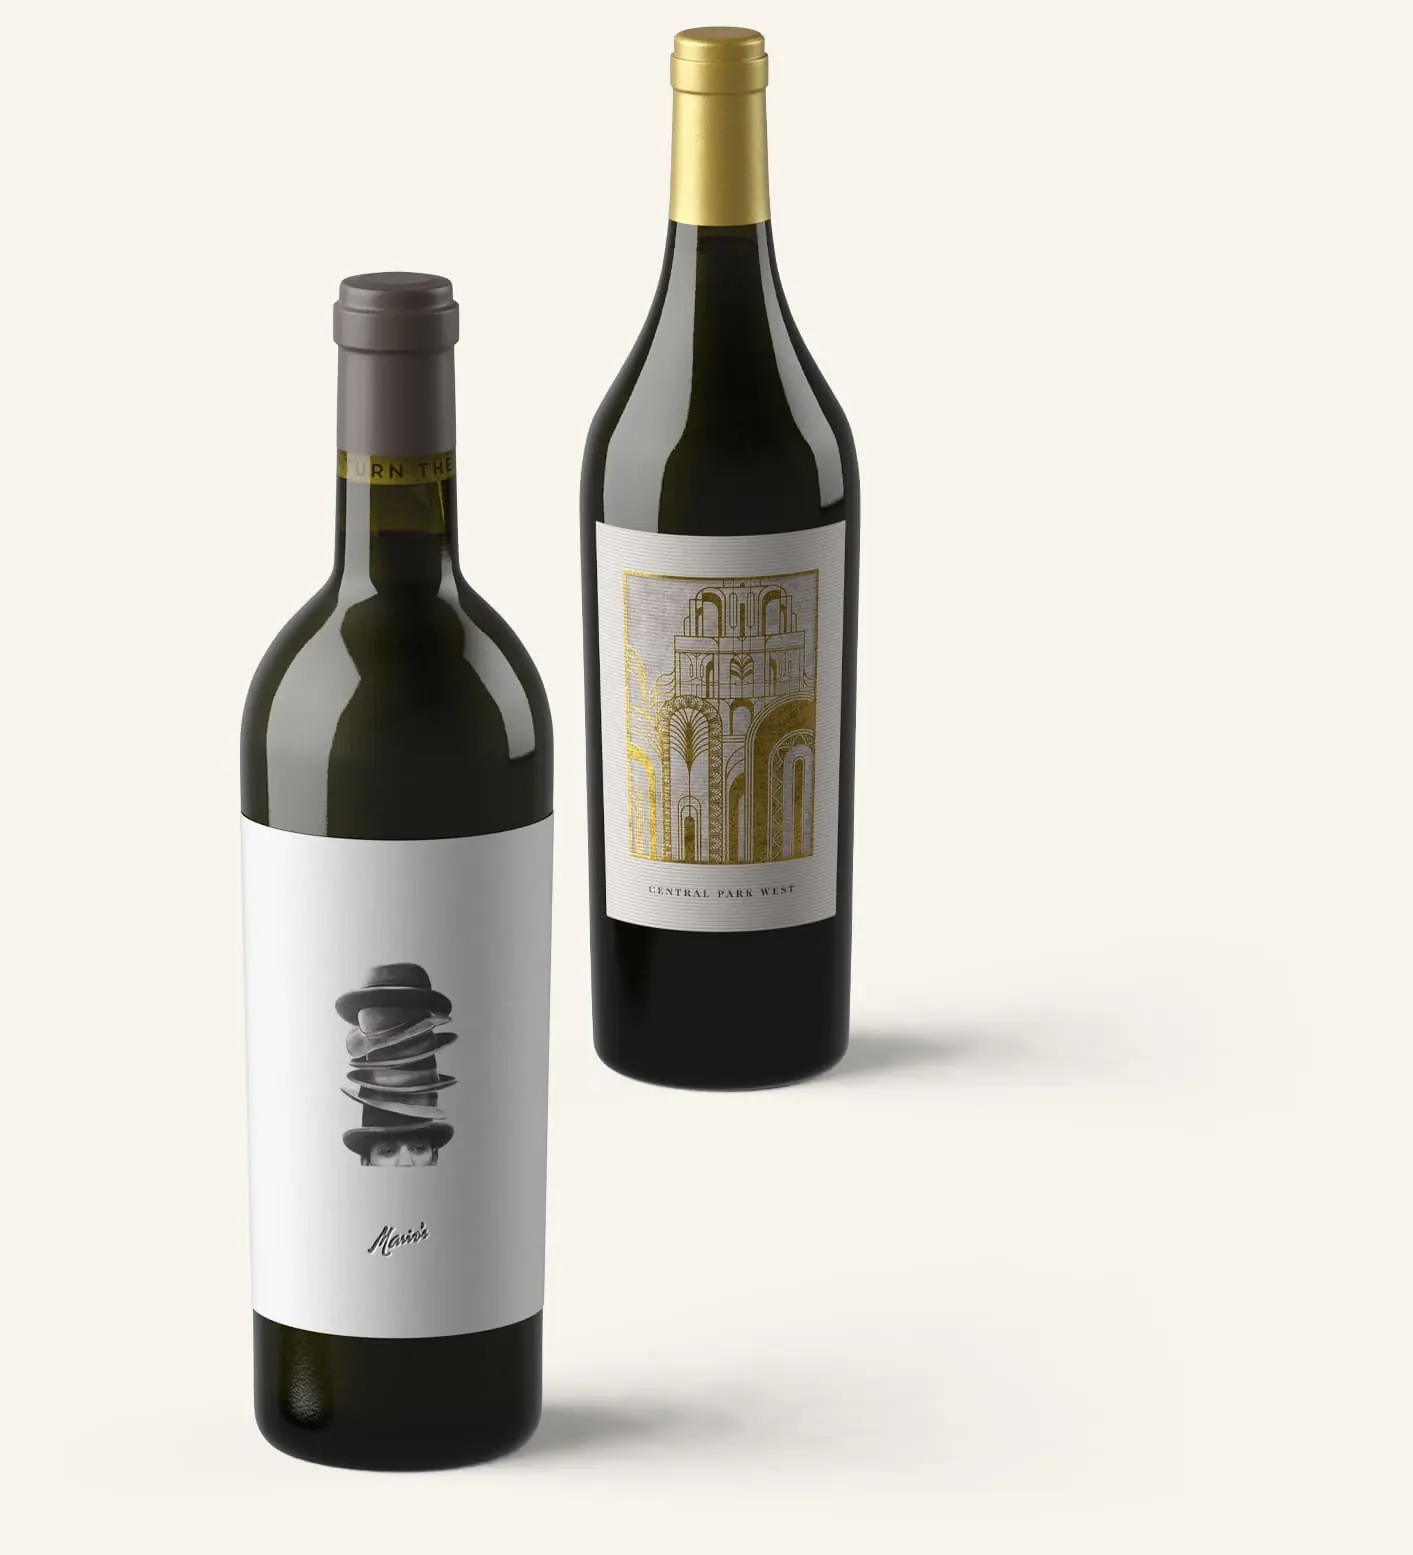 Two bottles of wine on a white background.